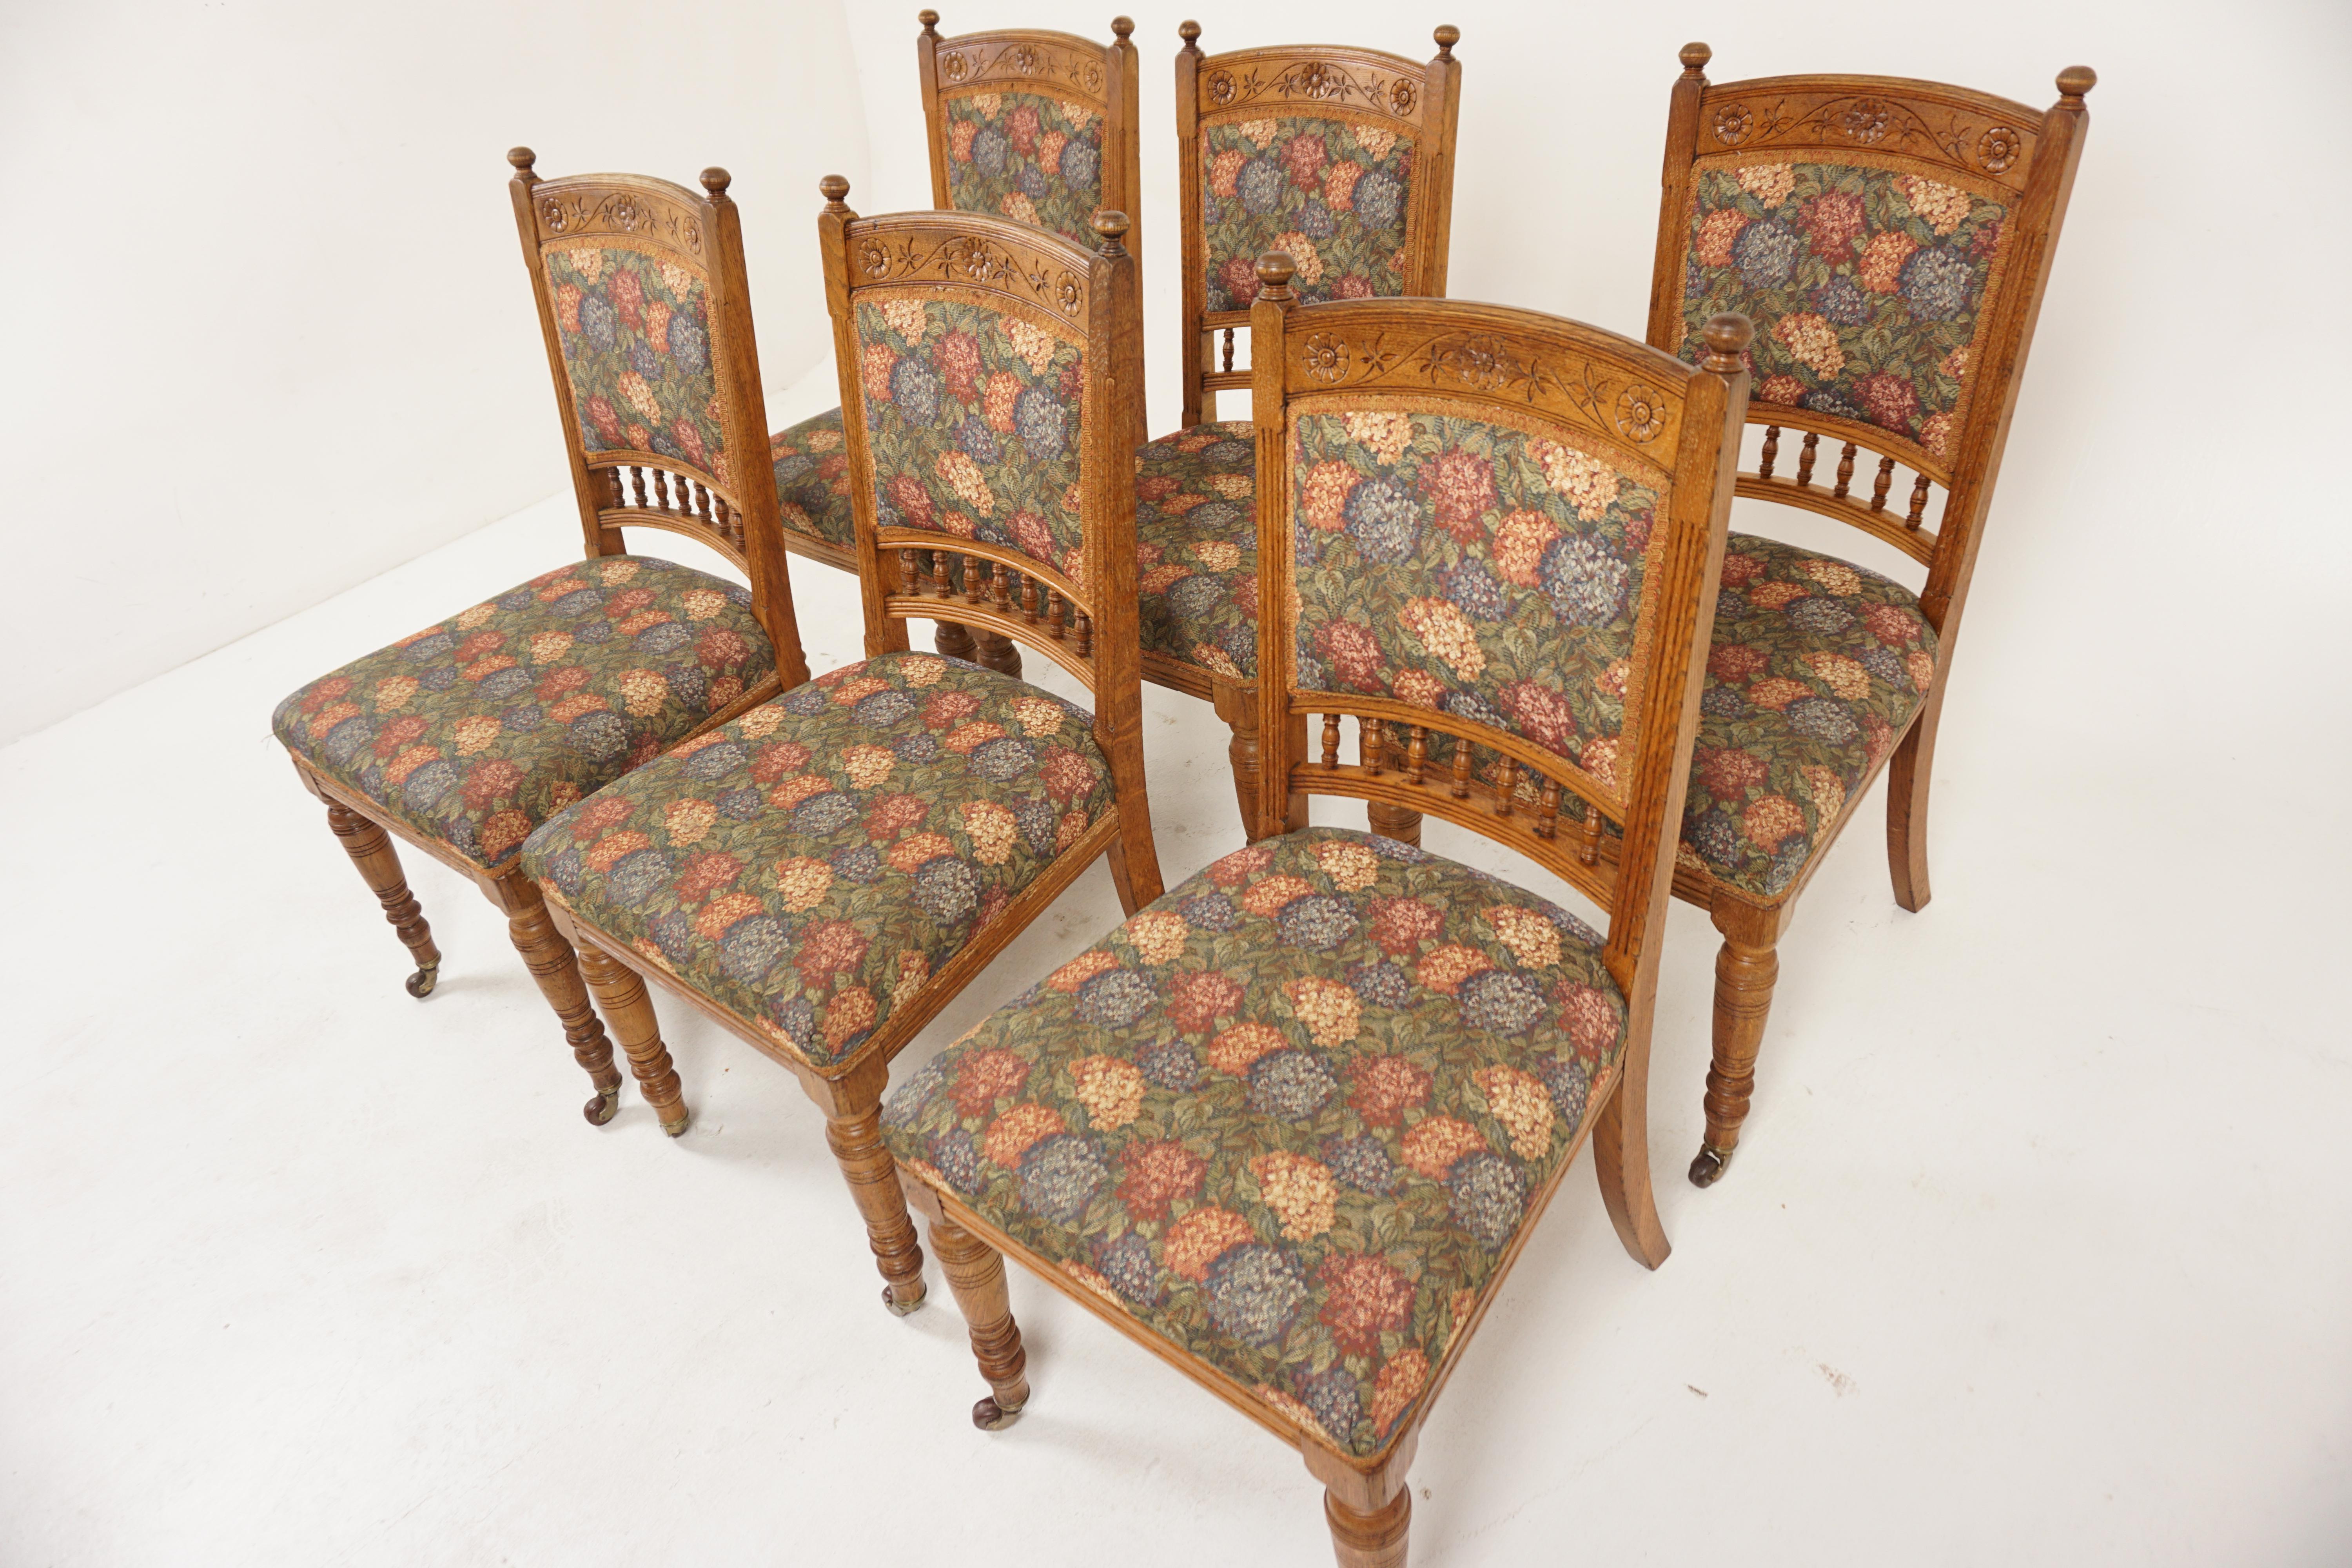 6 Victorian Oak Upholstered Dining Chairs, Scotland 1880, H1169

Solid Oak
Original finish
Carved shaped top rail
Pair of supports on the ends with turned finials on top
Upholstered backs and seats
All standing on turned front legs
Terminating on